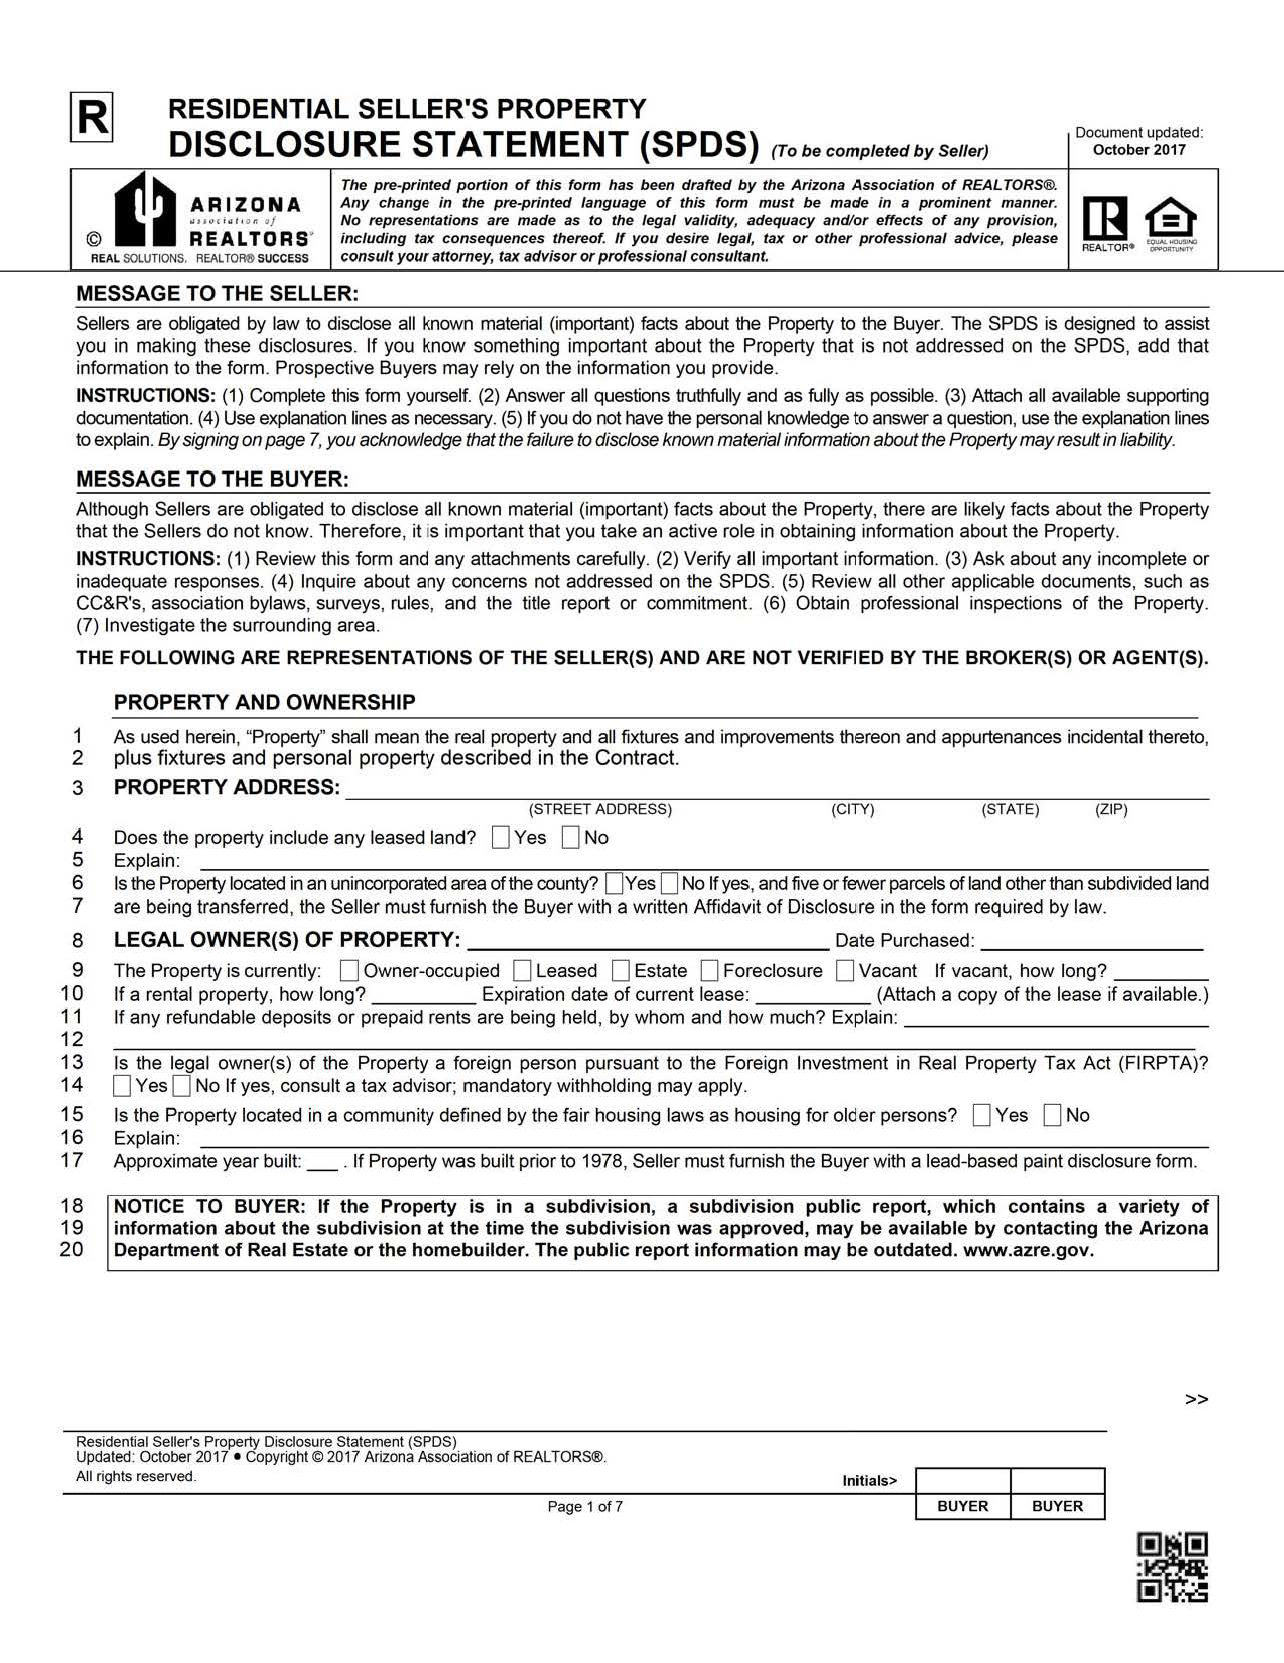 Coconino County Residential Sellers Property Disclosure Statement